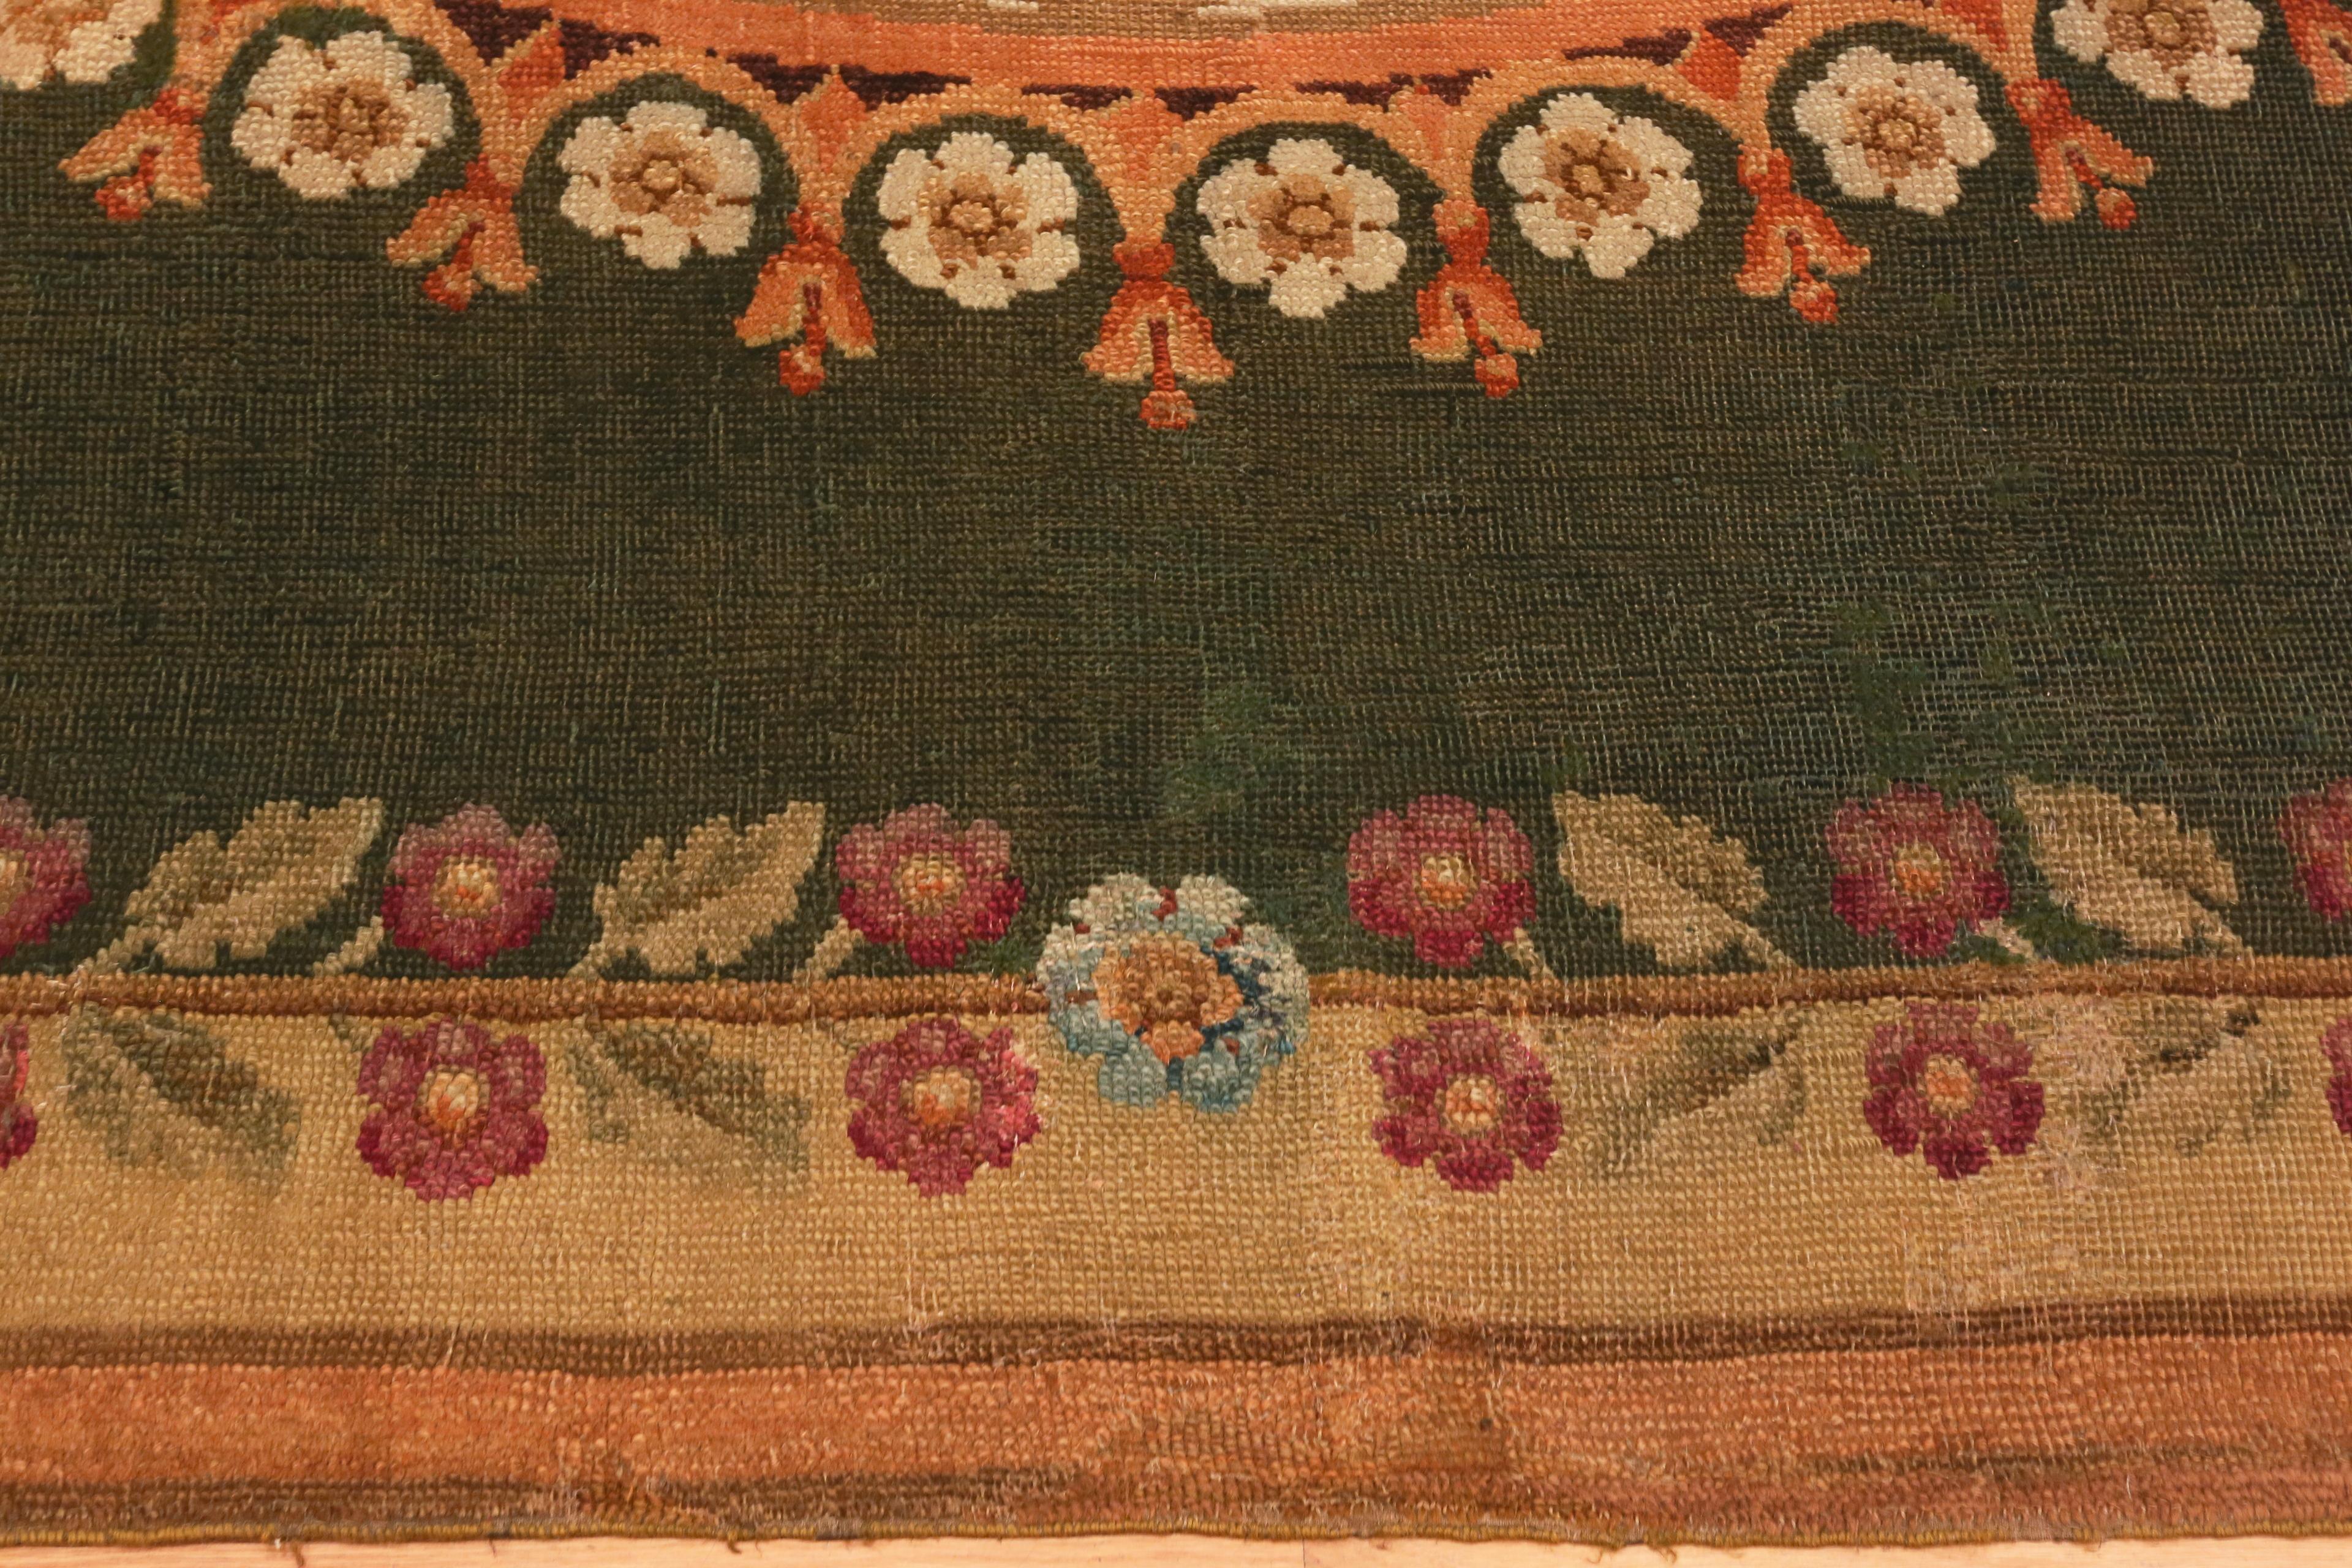 Beautiful Antique French Charles X Savonnerie Rug , Country of Origin / Rug Type: French Rug, Circa Date: 1820. Size: 10 ft 5 in x 14 ft 1 in (3.17m x 4.29 m).